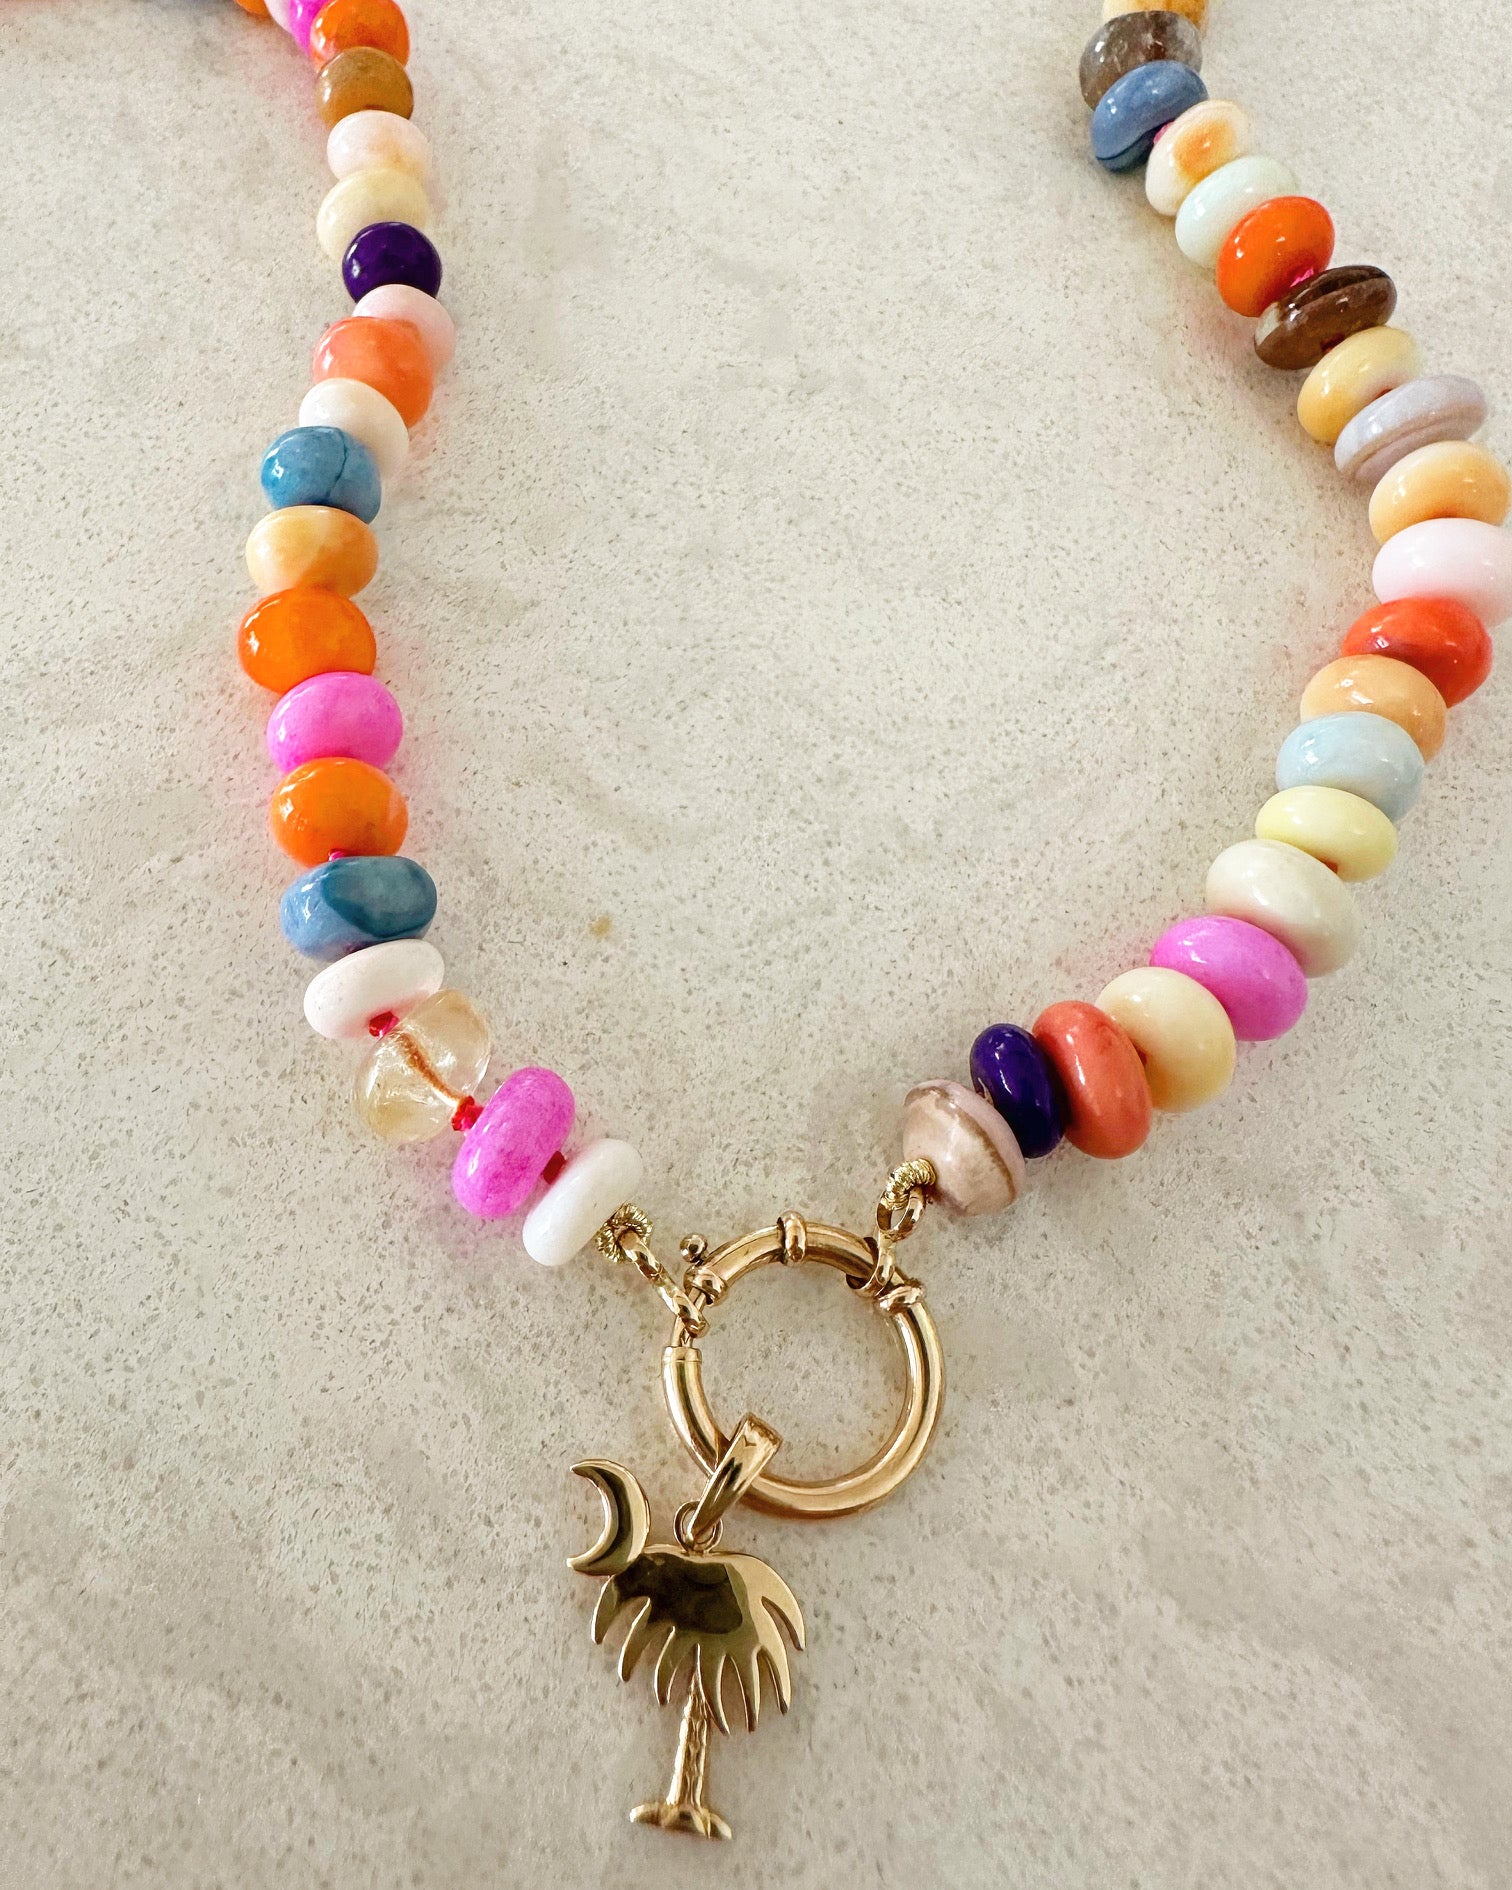 Buy Candy Beaded Necklace, Adjustable Candy Necklace, Candy Gemstone Bead  Necklace Multi Color Beaded Necklace Fake Candy Necklace Online in India -  Etsy